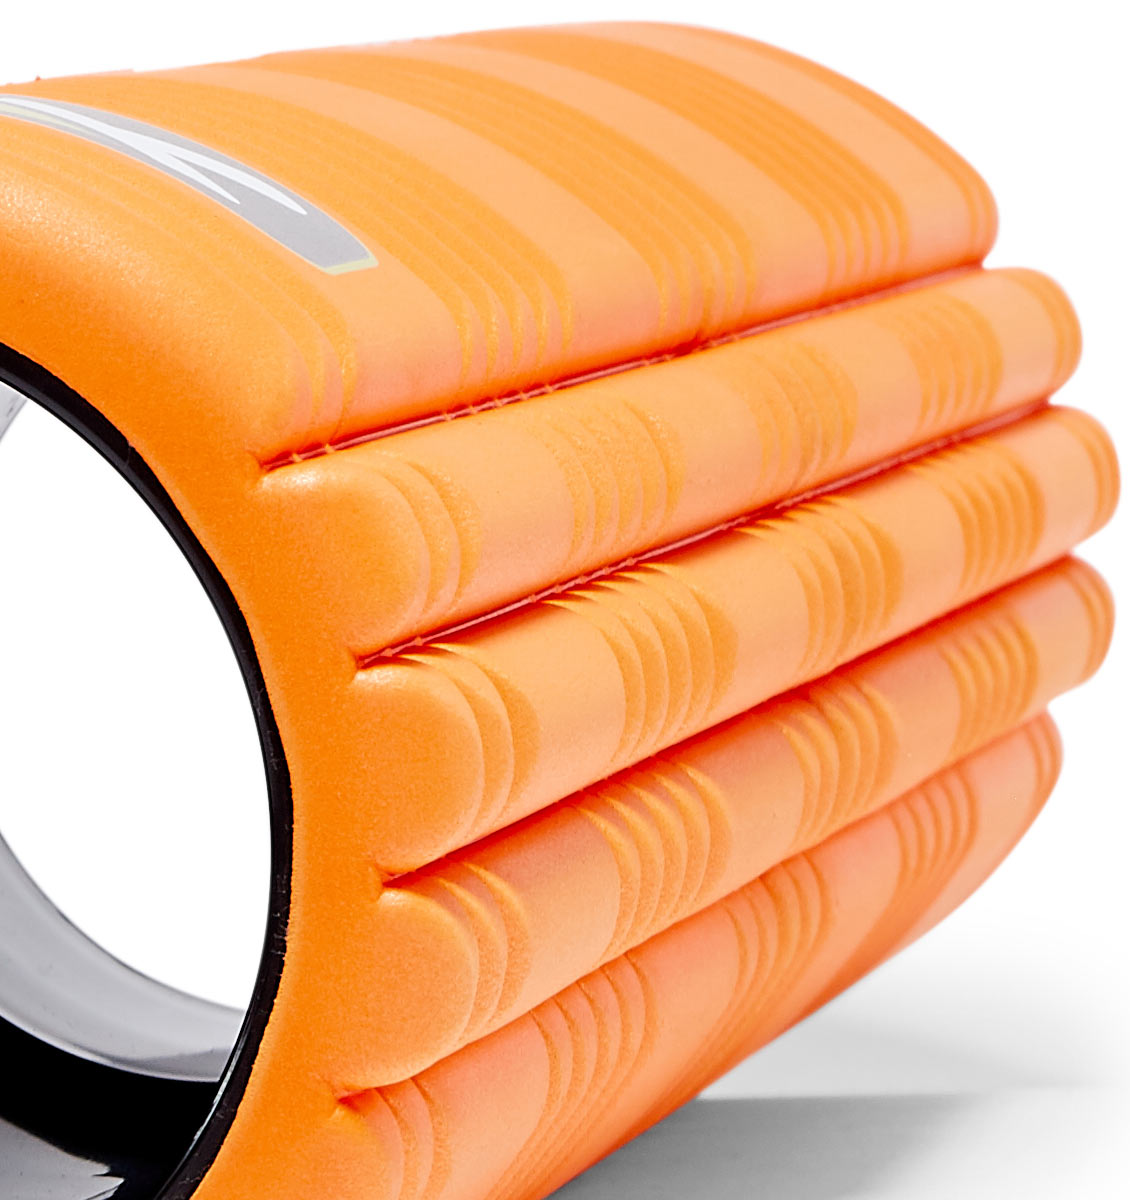 TPT3GRD2OWS0000 TriggerPoint The Grid 2.0 Foam Roller Orange - 60 Degree Angle - Close Up